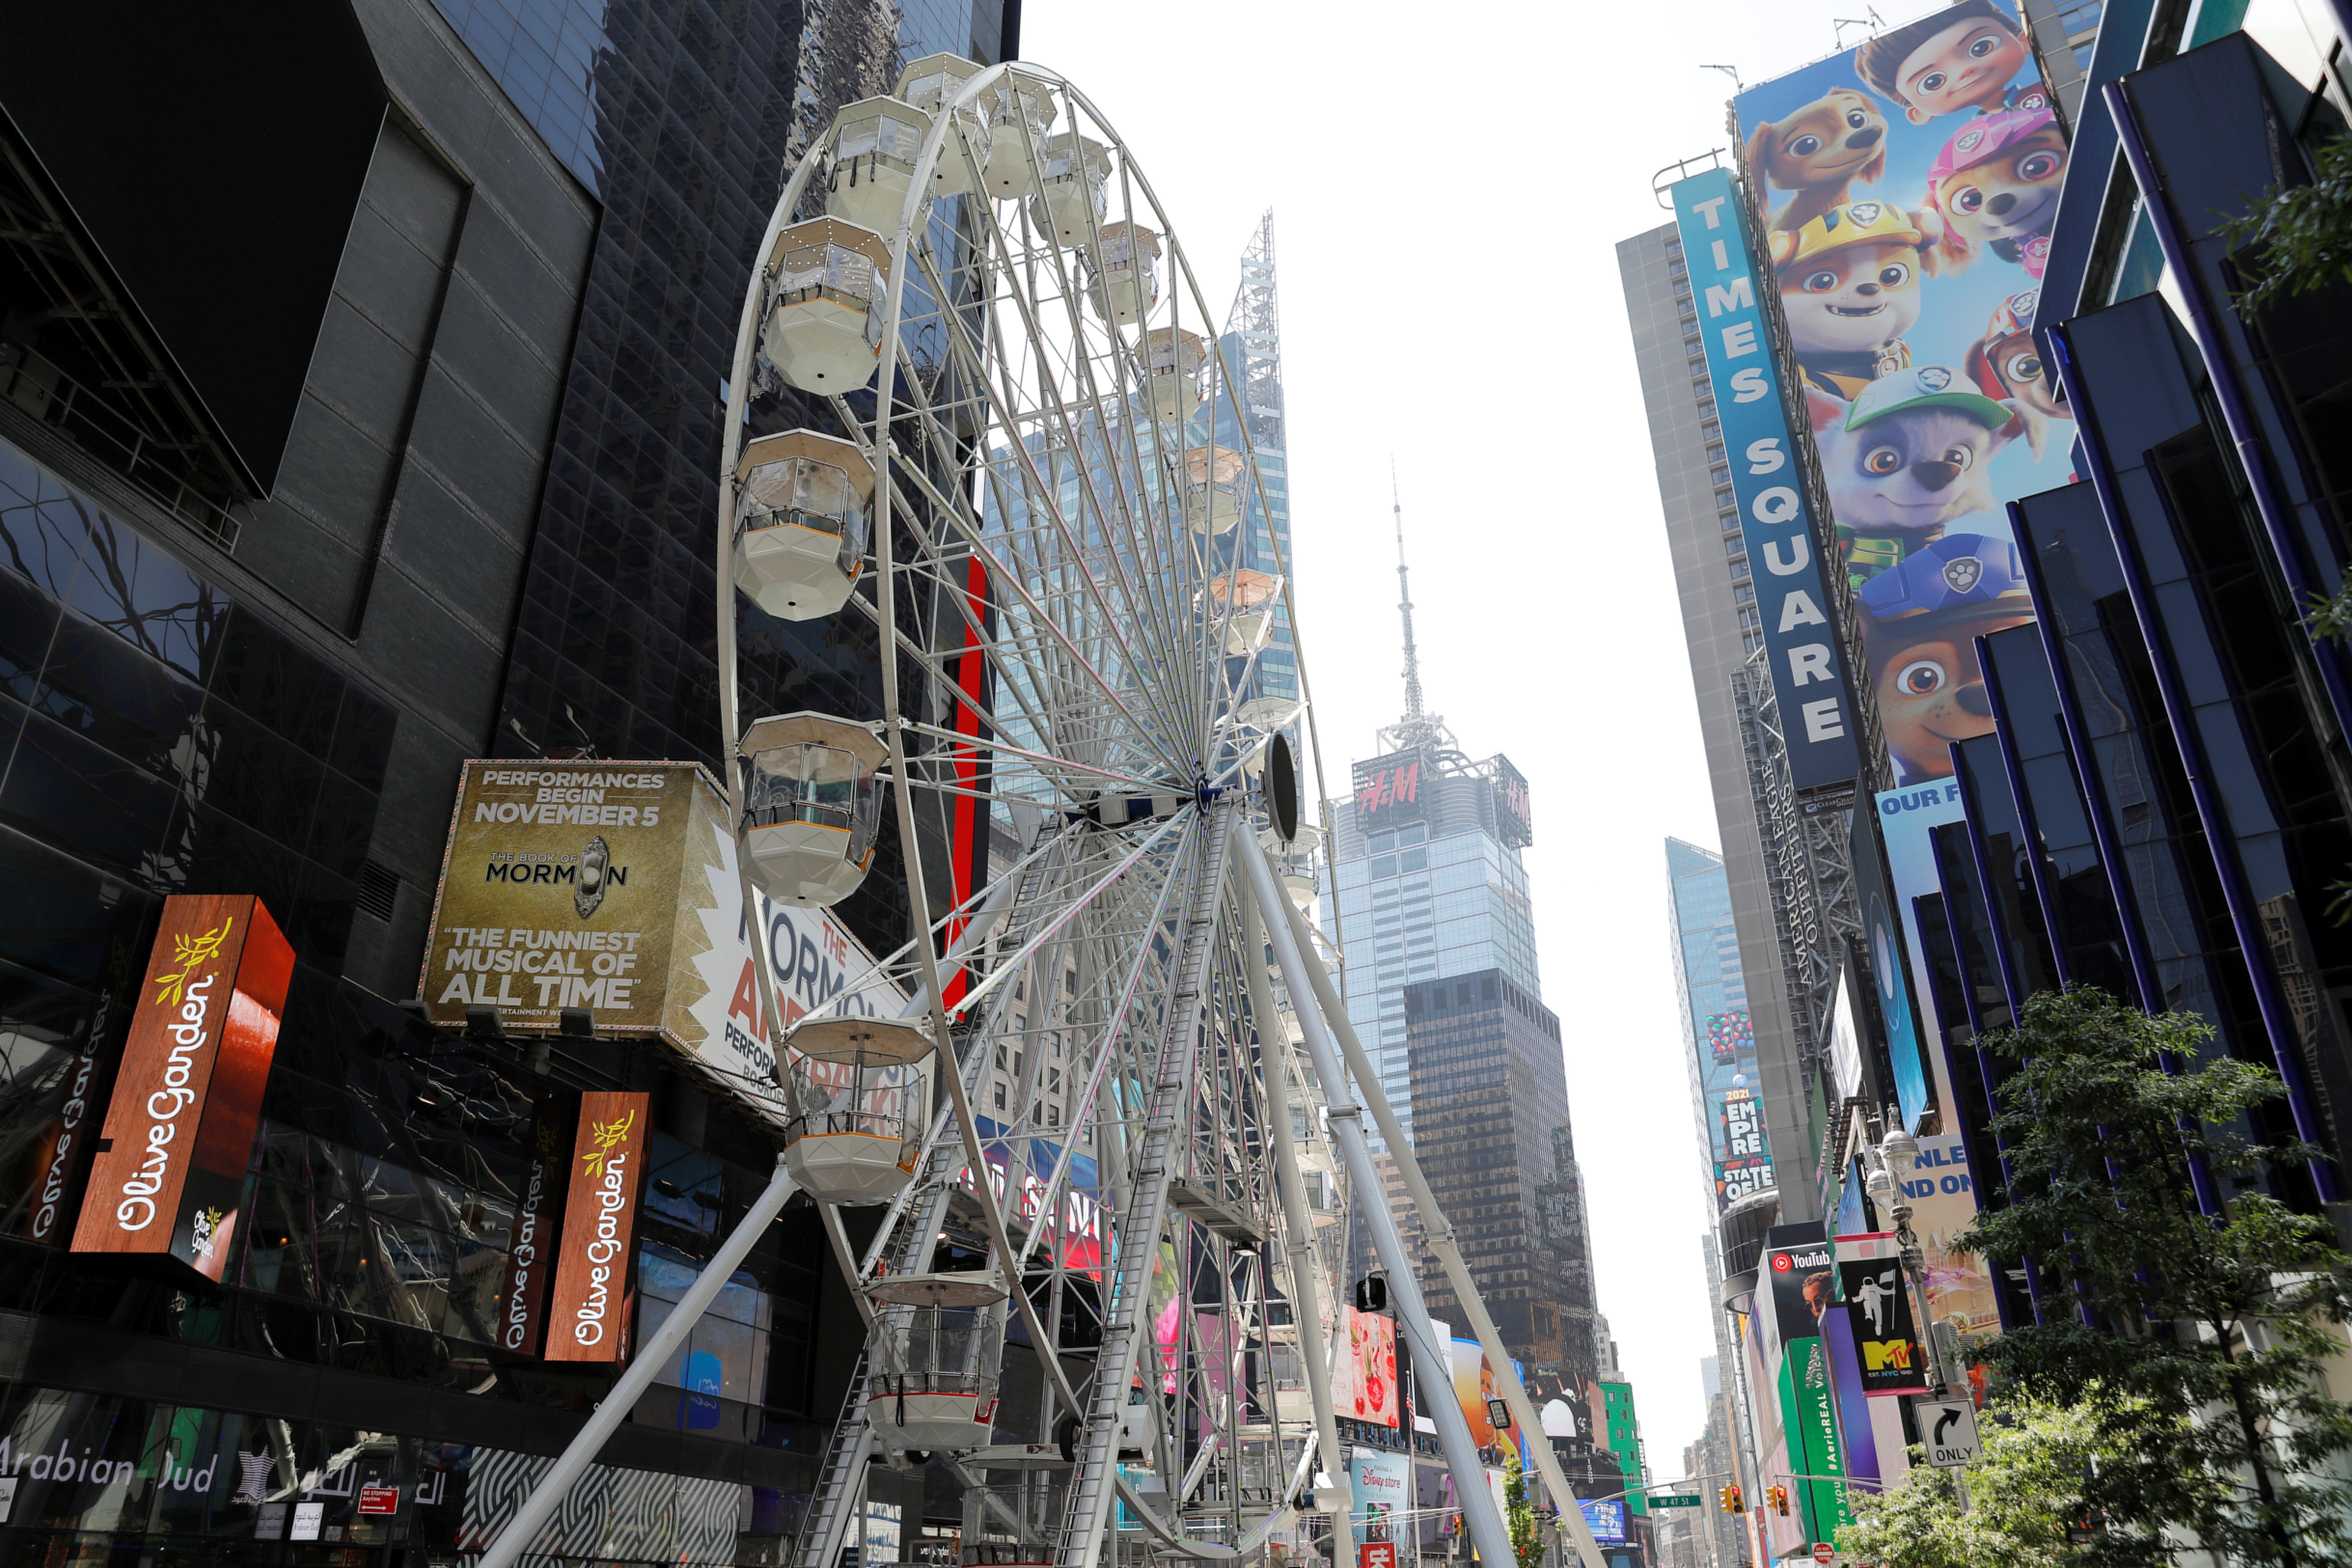 A Ferris wheel lifts spirits in New York’s Times Square